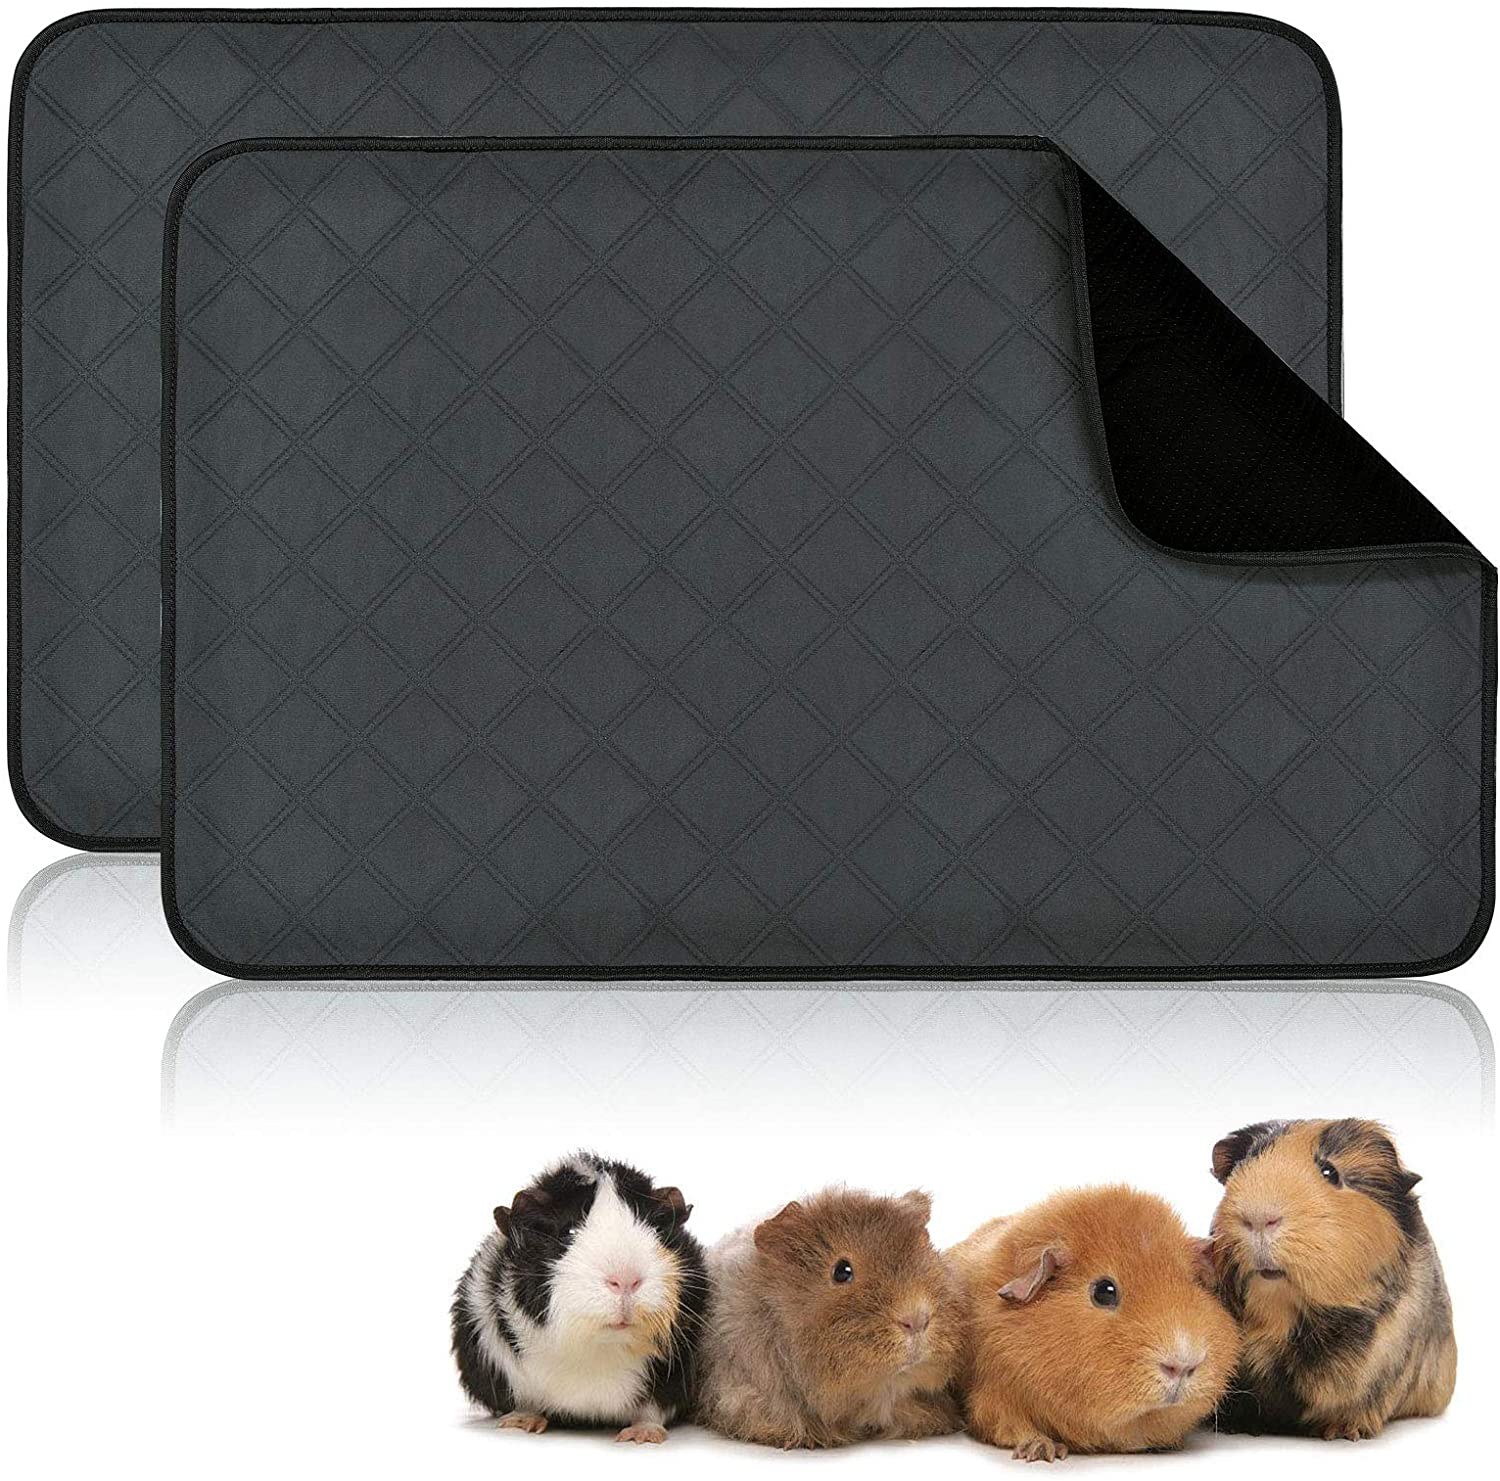 BWOGUE Guinea Pig Fleece Cage Liners, 2 Pack Washable Guinea Pig Pee Pads, Waterproof Reusable& anti Slip Guinea Pig Bedding Super Absorbent Pee Pad for Small Animals